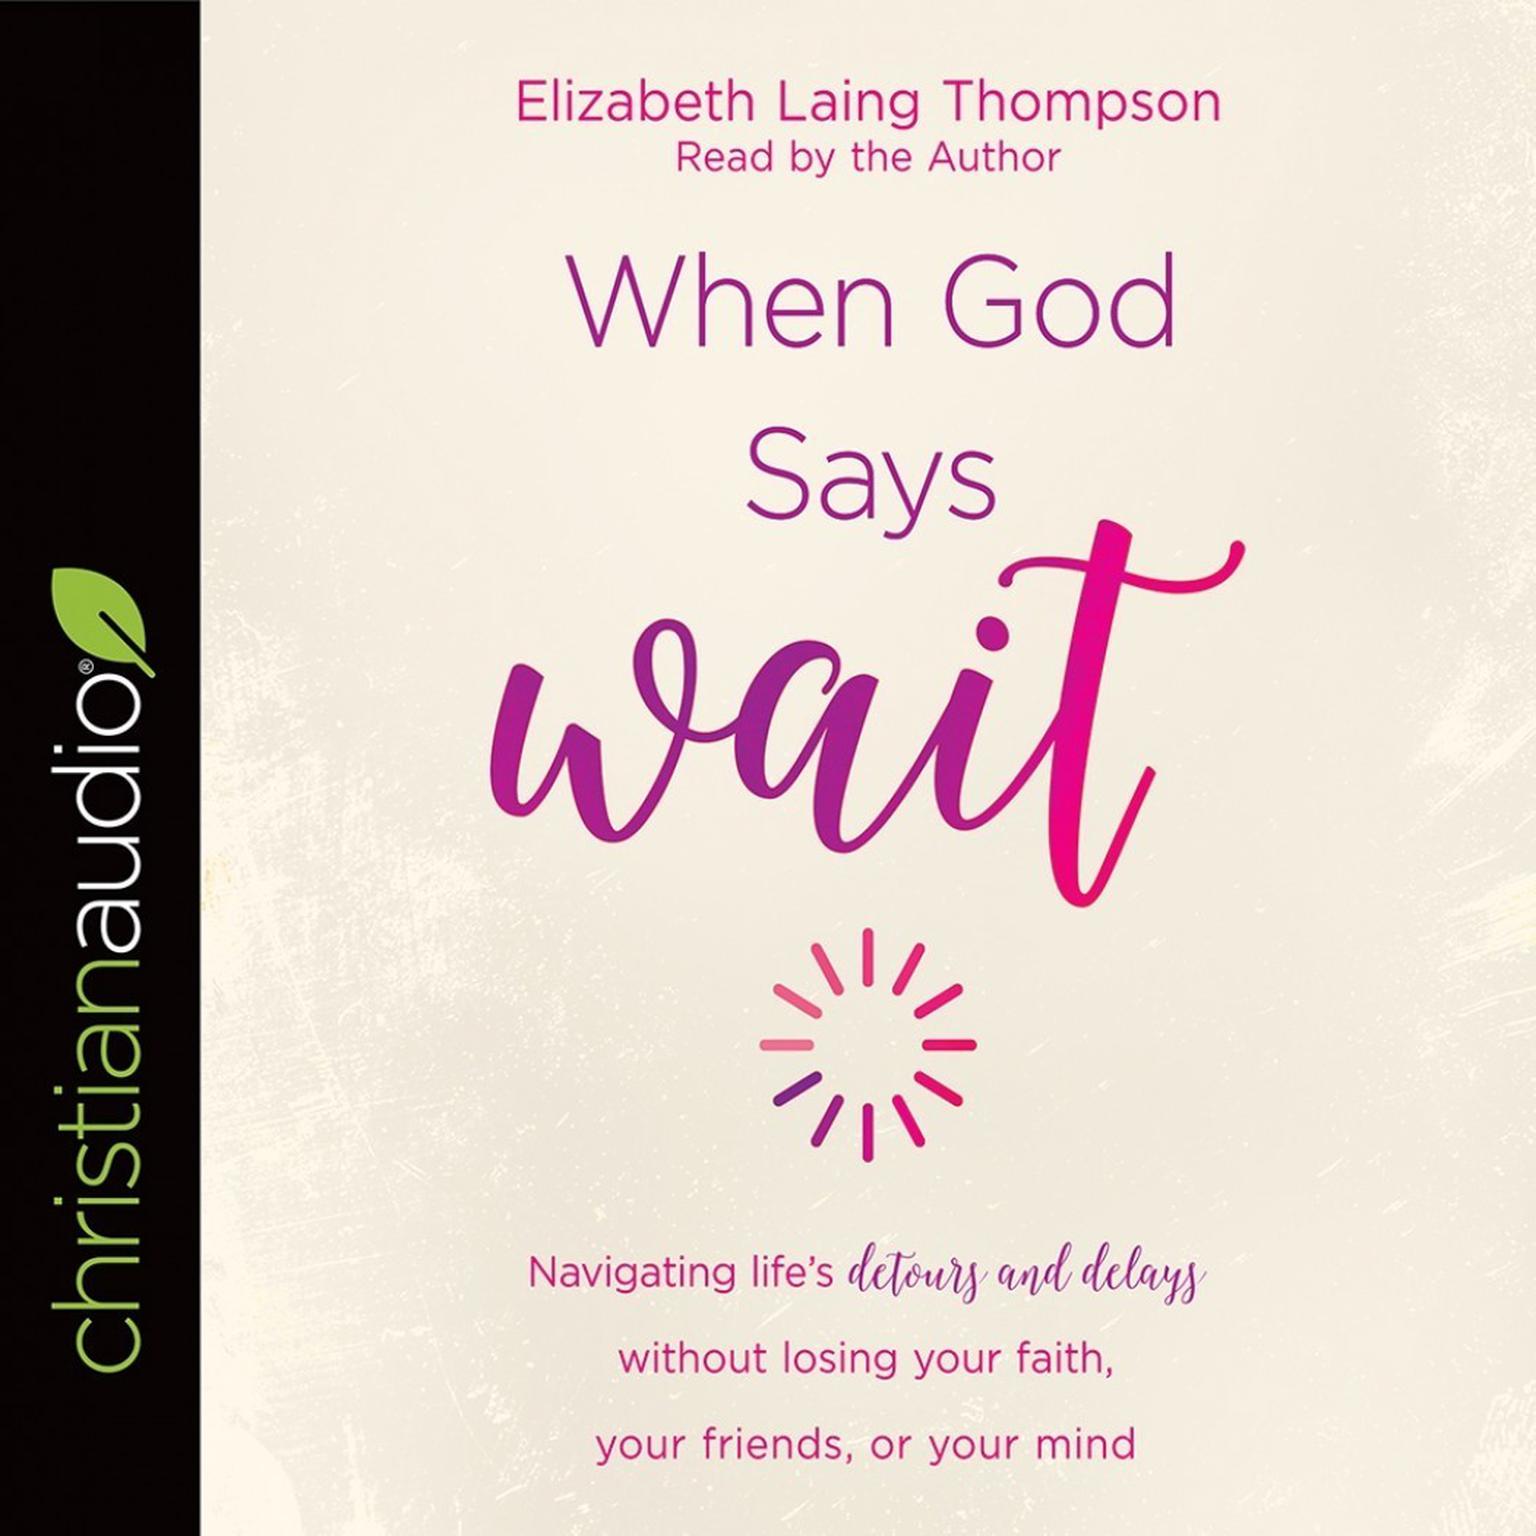 When God Says Wait: Navigating lifes detours and delays without losing your faith, your friends, or your mind Audiobook, by Elizabeth Laing Thompson